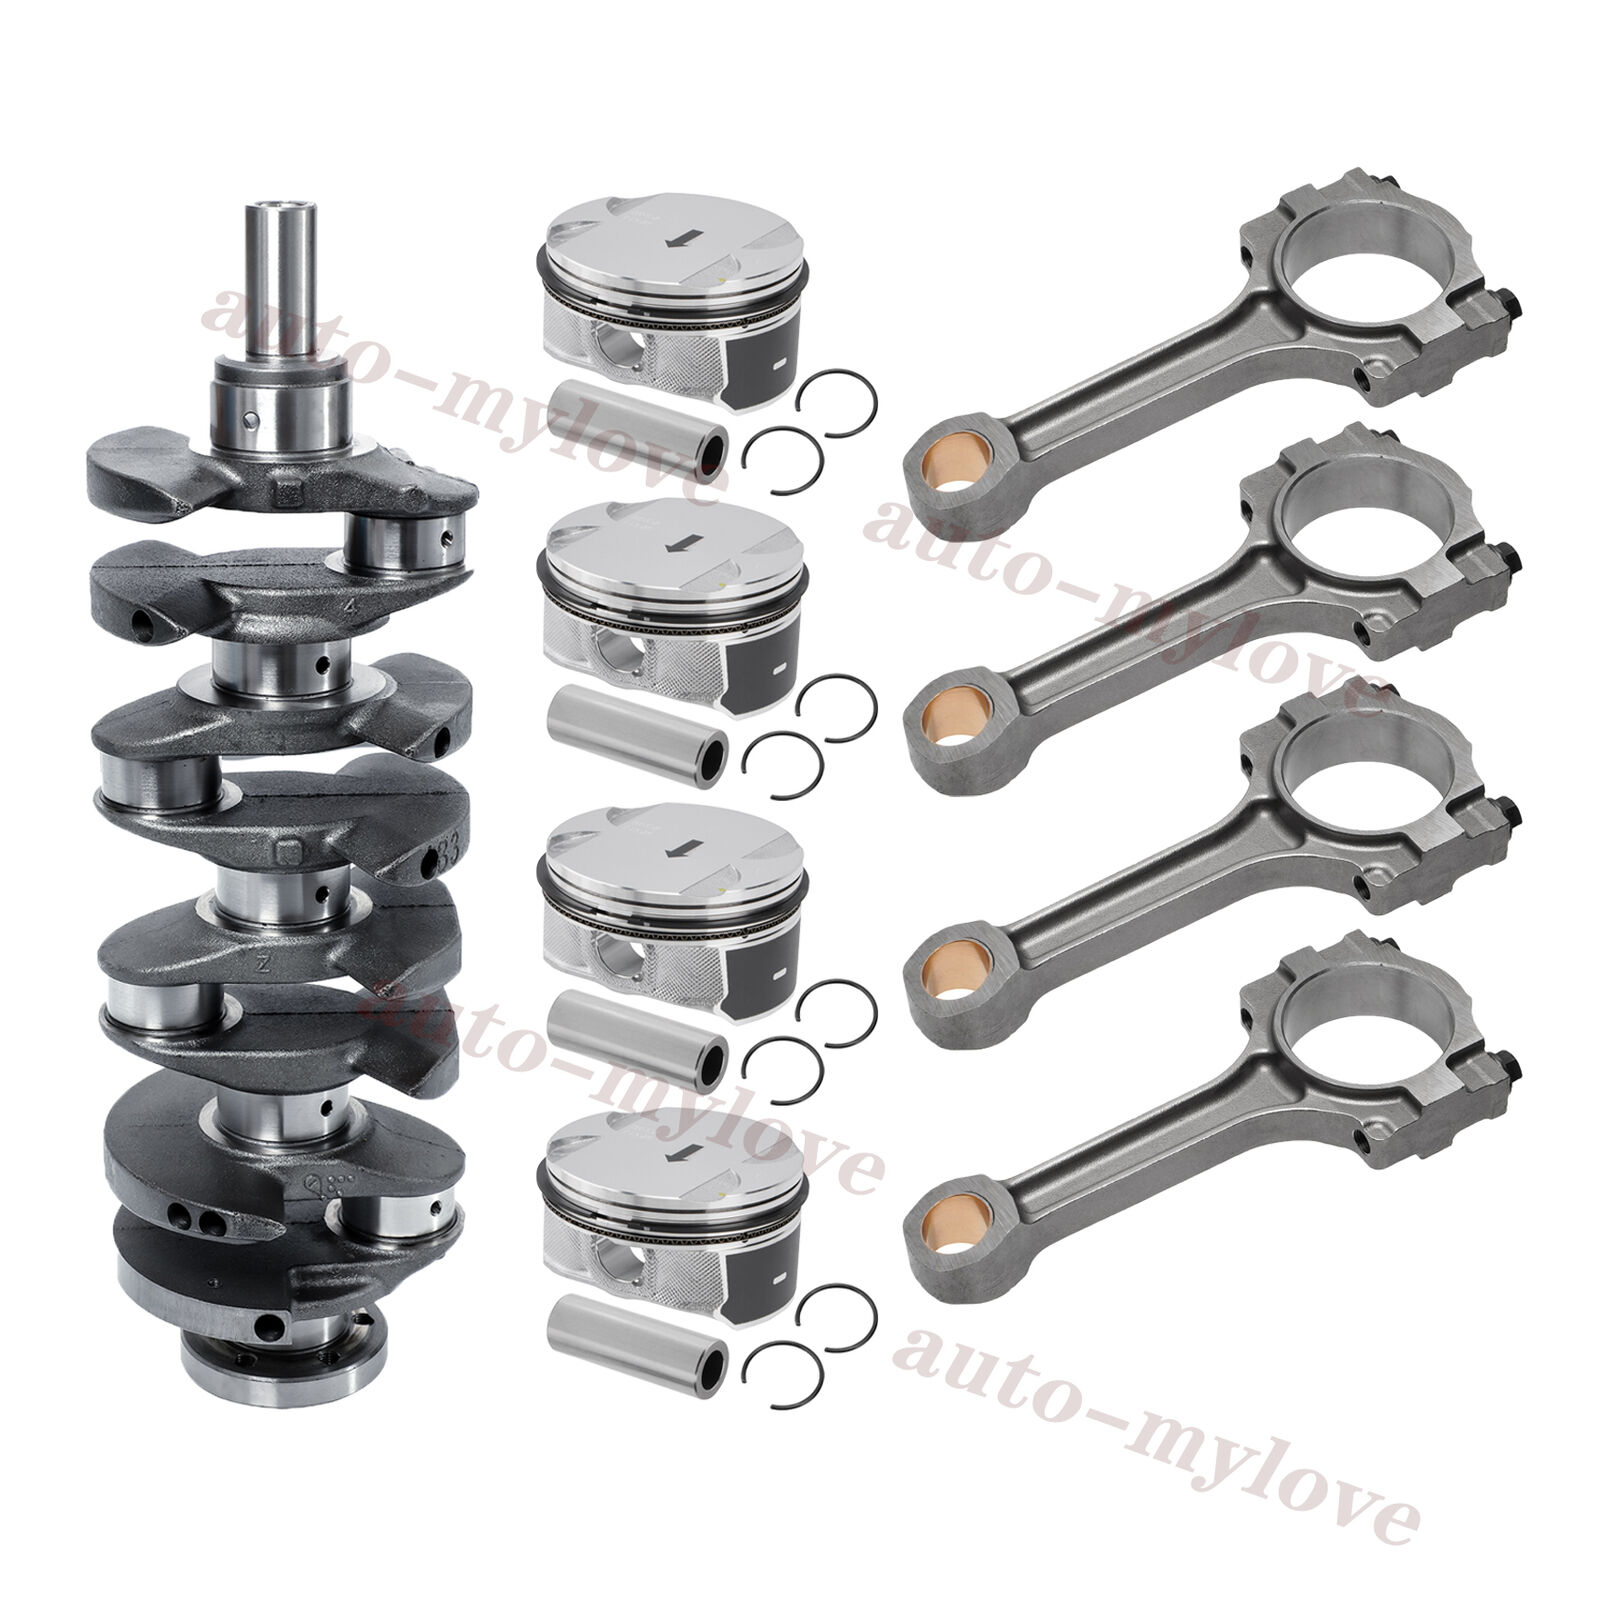 NEW Crankshaft /Con Rods /Pistons/ Bearings/ Gasket Kit For Chevy GMC Buick 2.4L